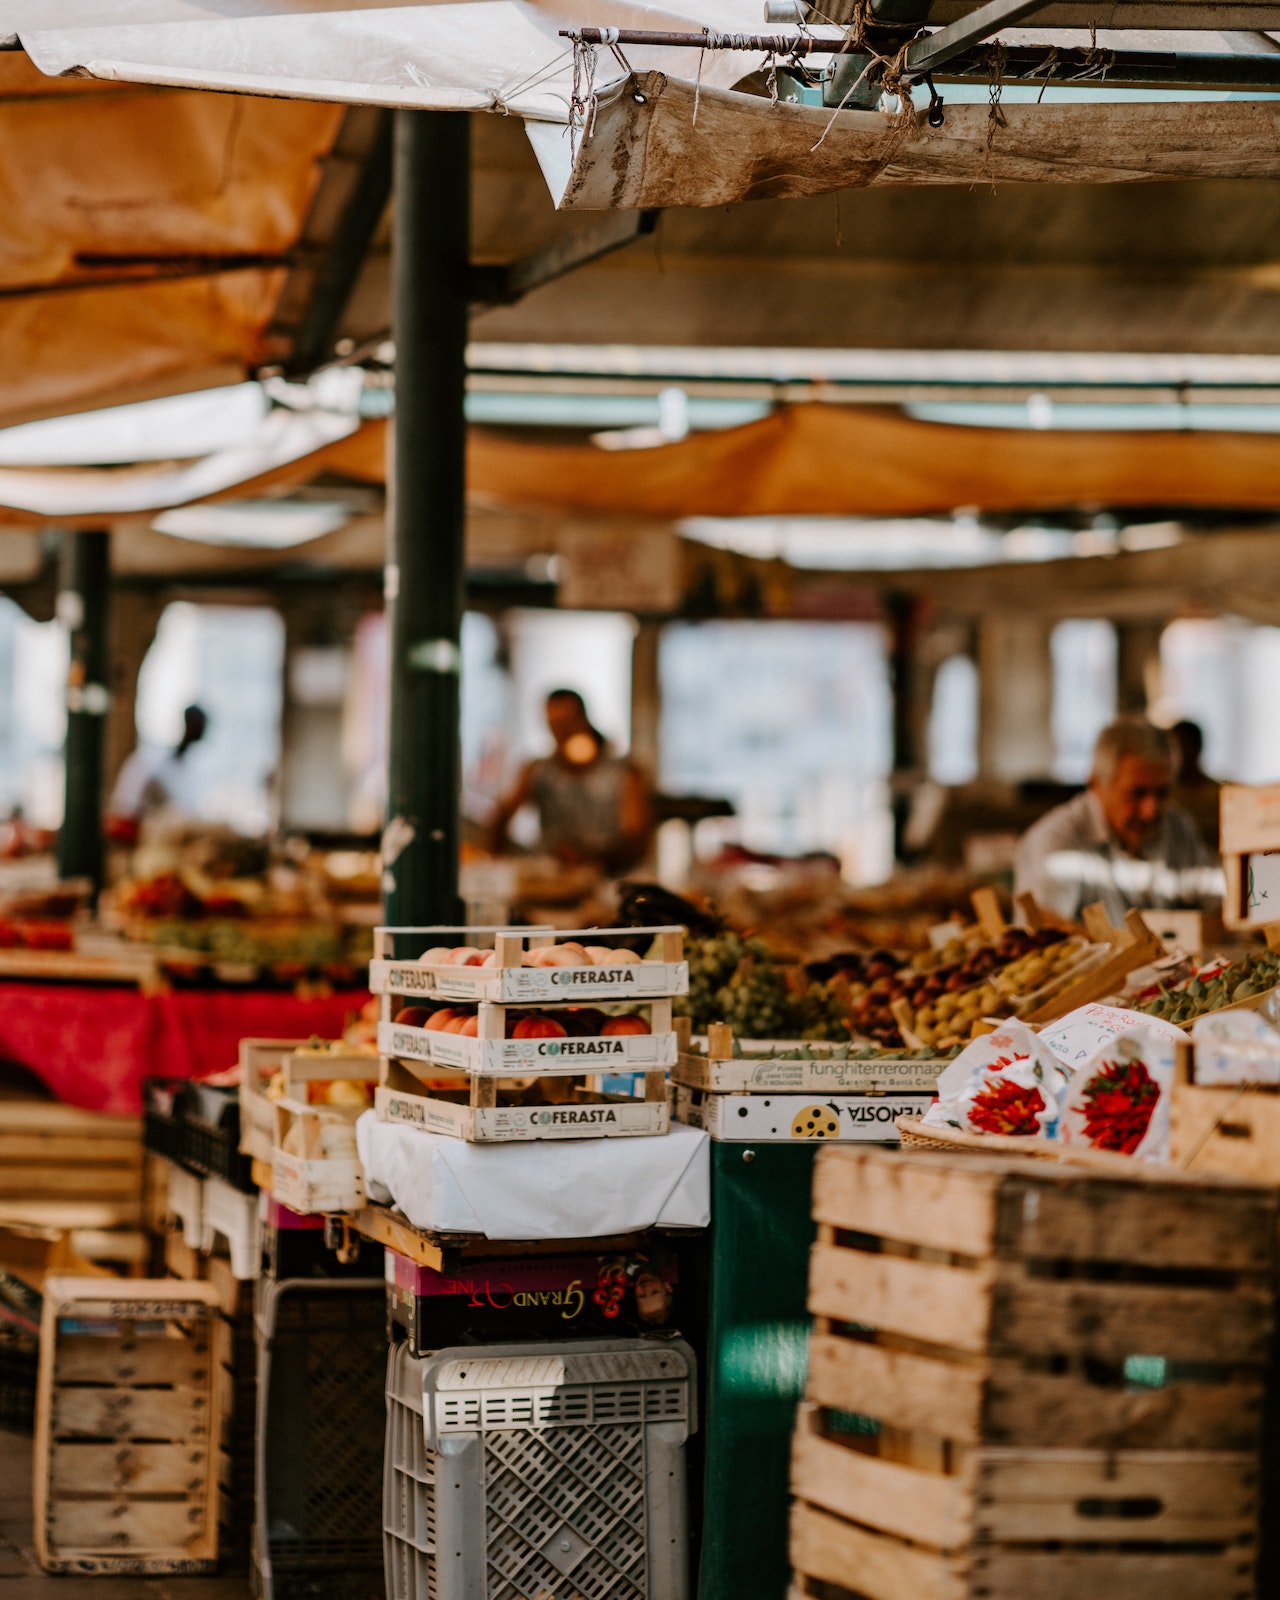 Farmers market stands with fruits by Annie Spratt on Unsplash